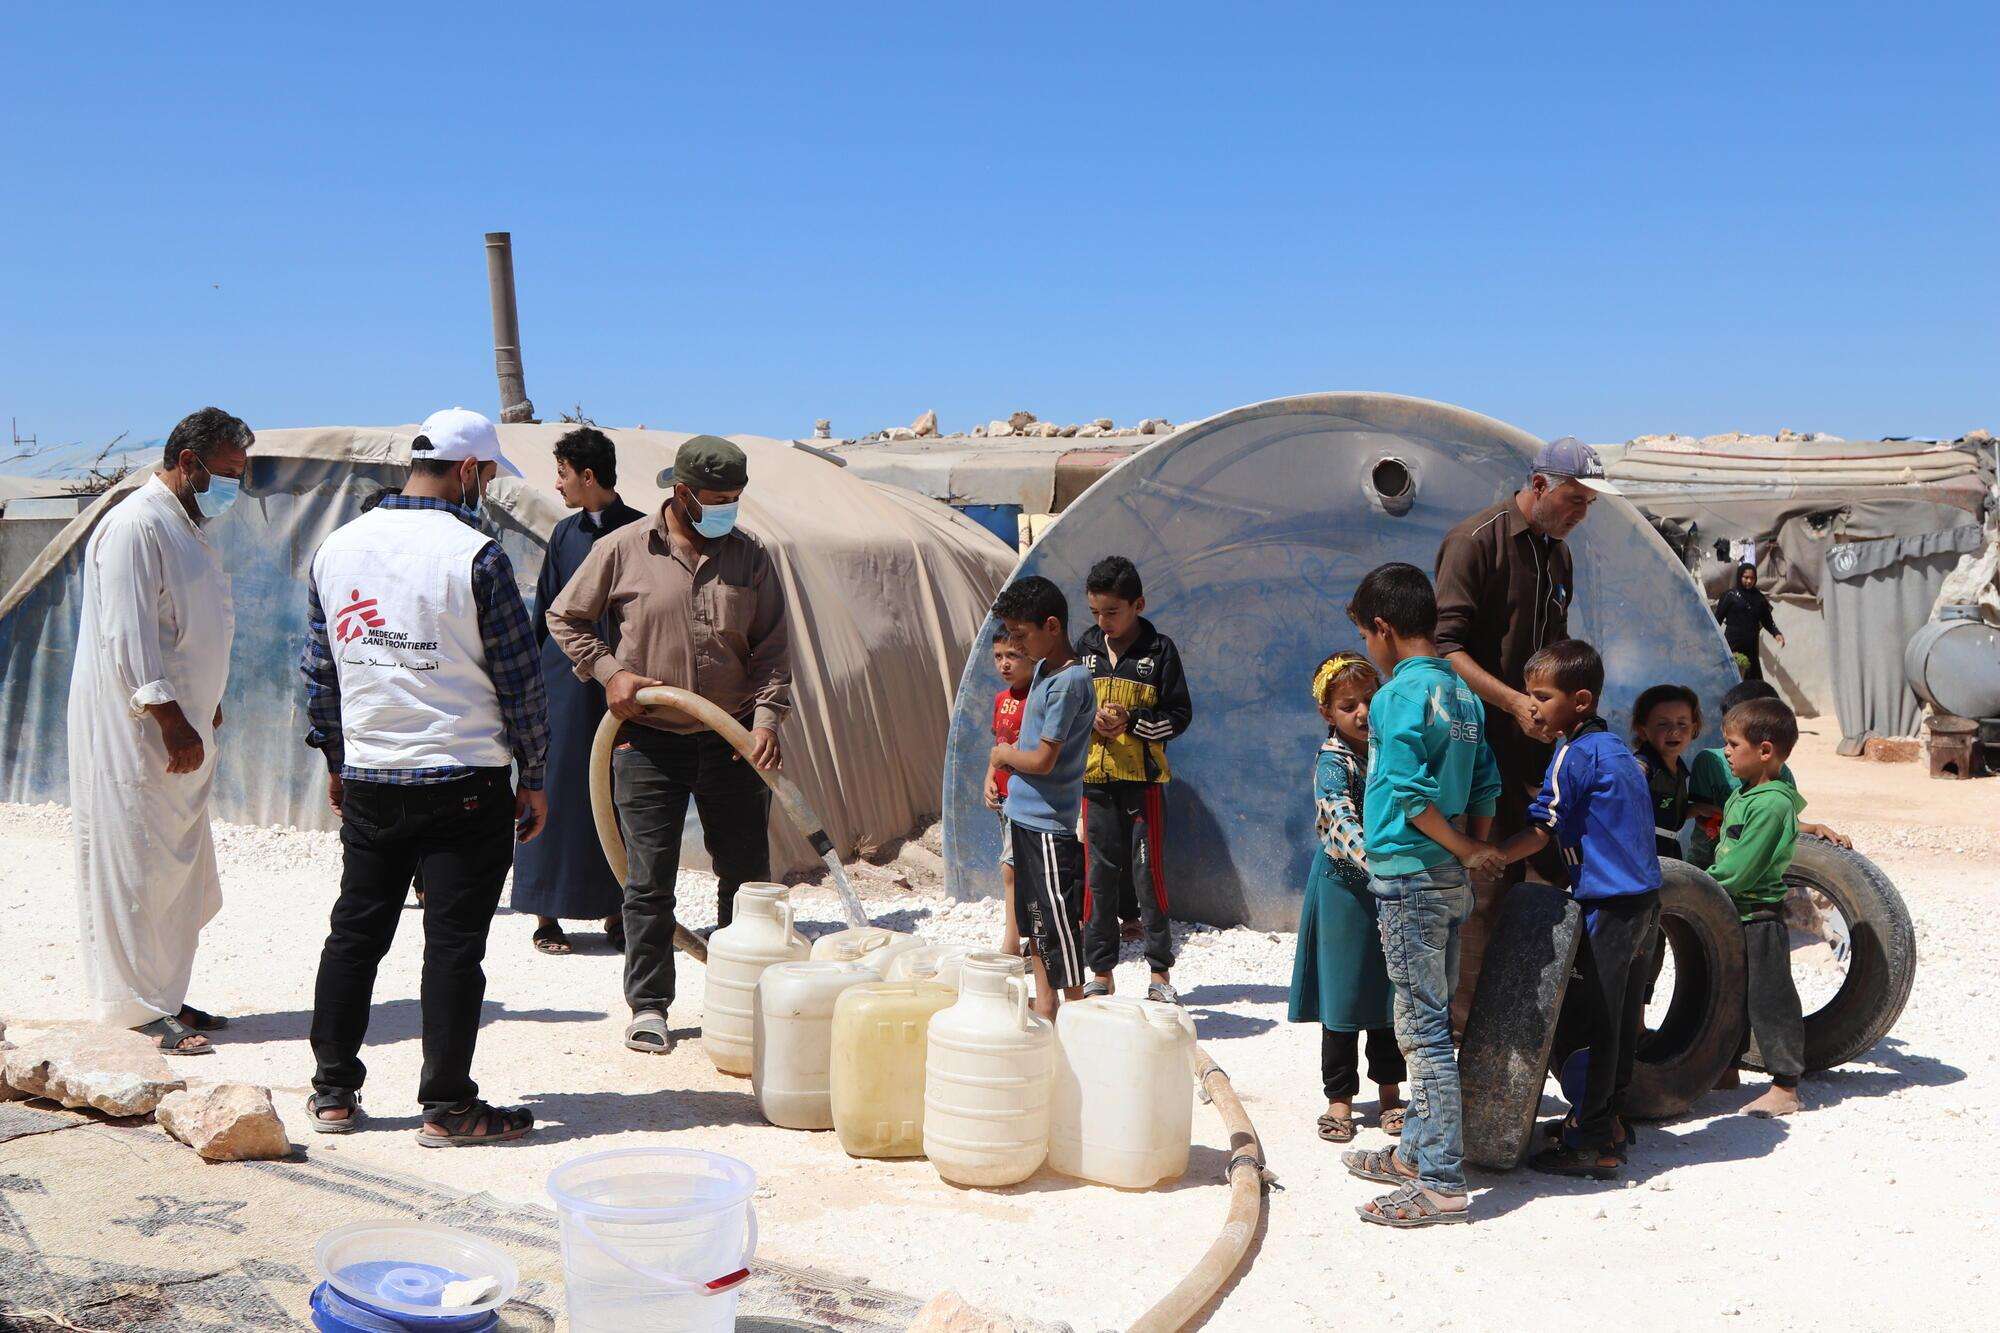 Northern Syria: Acute water crisis poses serious health risks